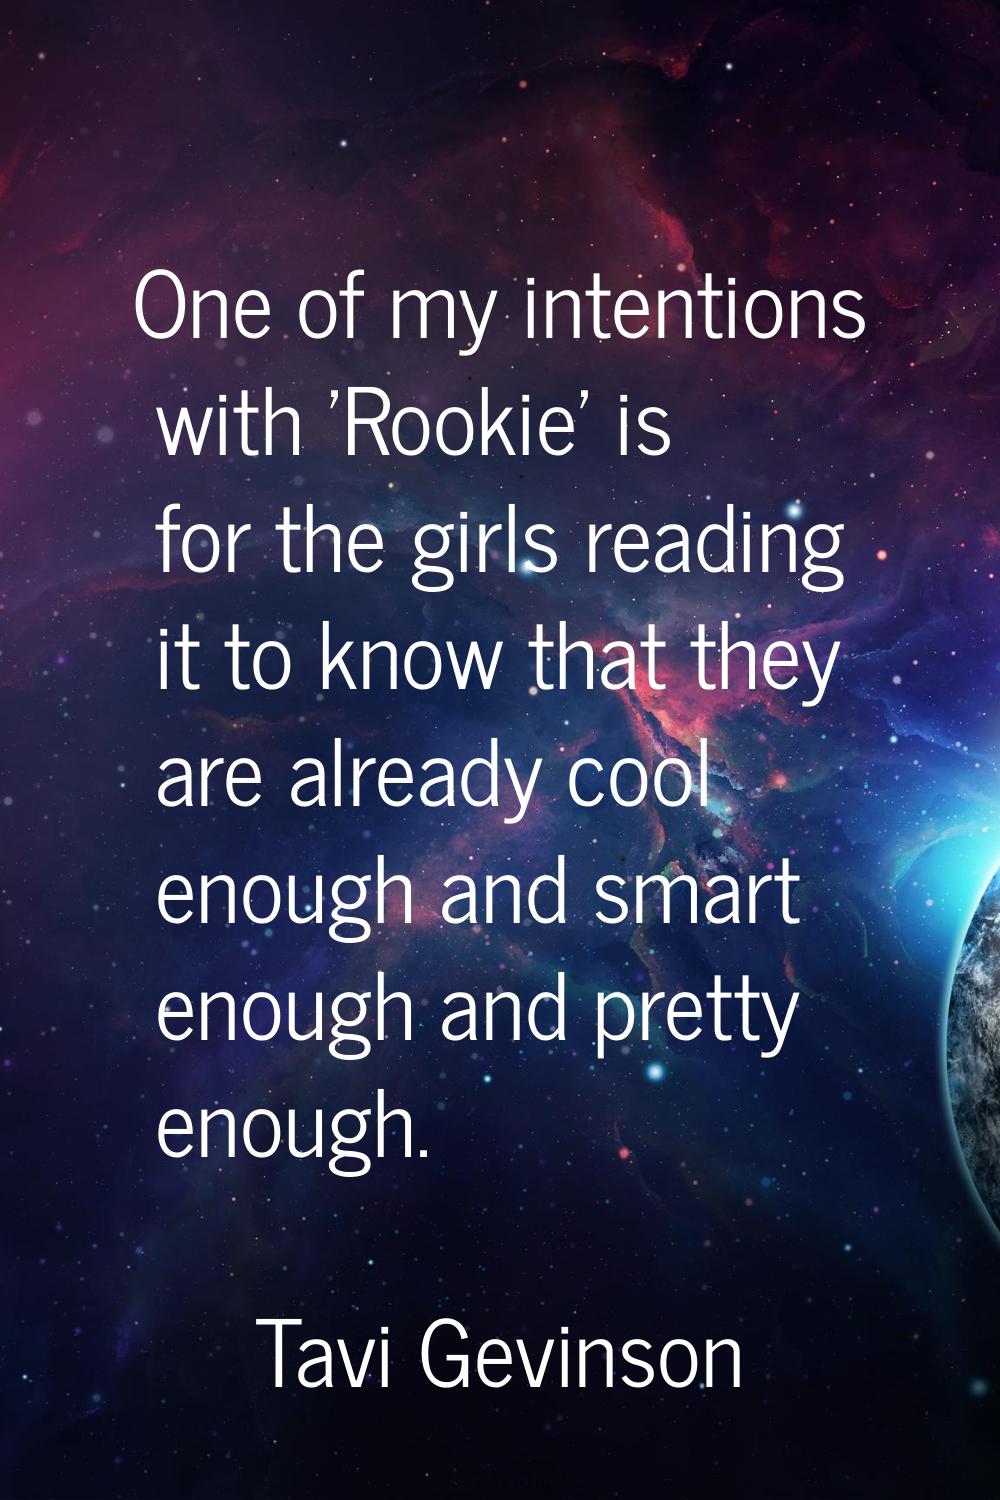 One of my intentions with 'Rookie' is for the girls reading it to know that they are already cool e